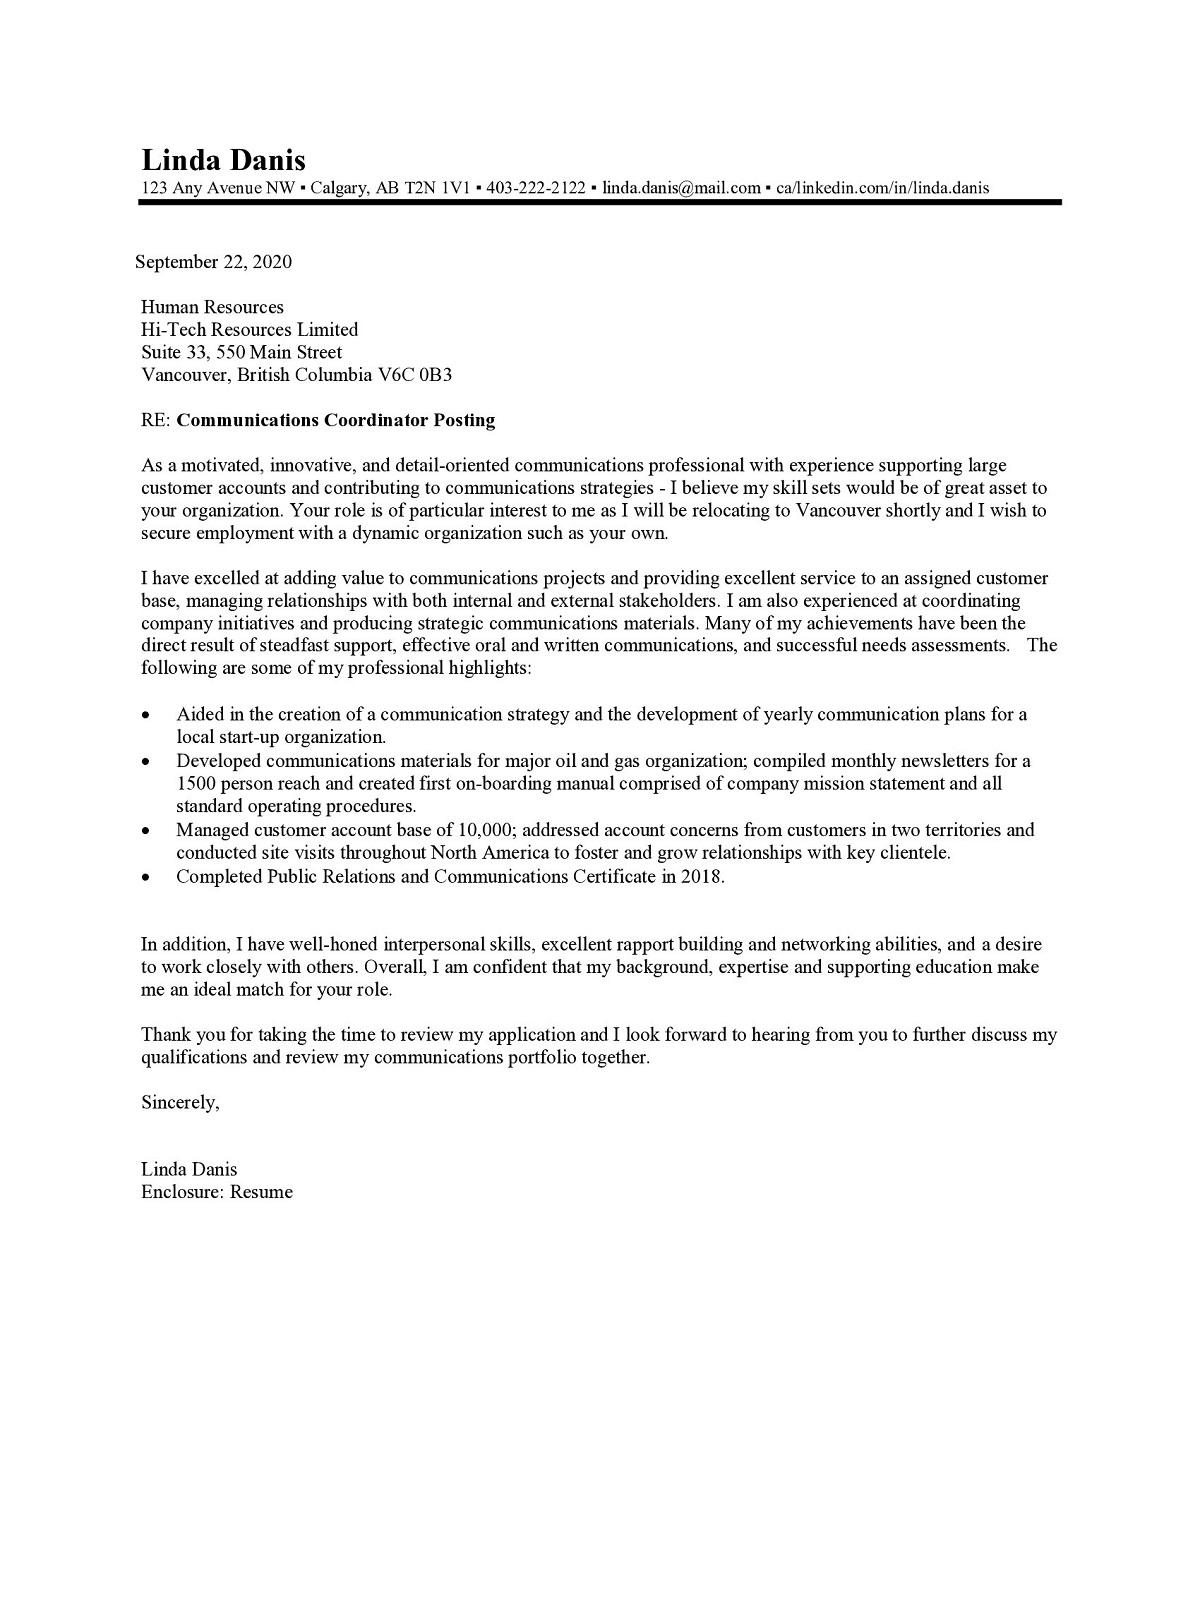 Sample cover letter: Corporate Communications, Mid Experience, Response to Ad